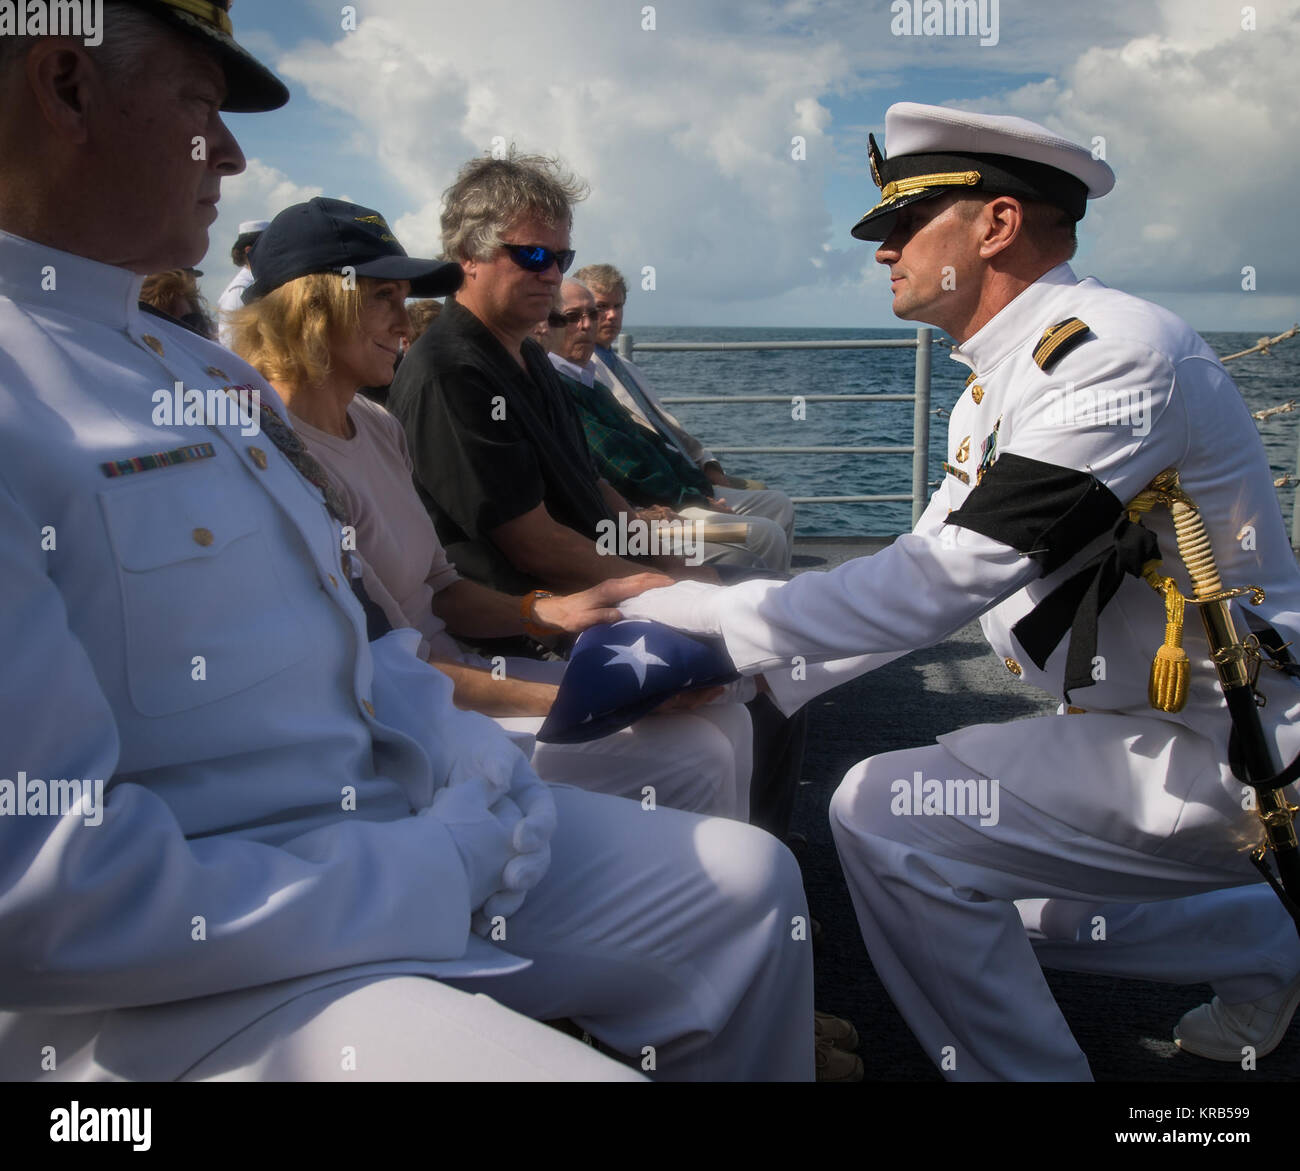 US Navy Captain Steve Shinego, commanding officer of the USS Philippine Sea (CG 58), presents the US flag to Carol Armstrong following the burial at sea service for her husband Apollo 11 astronaut Neil Armstrong, Friday, Sept. 14, 2012, aboard the USS Philippine Sea (CG 58) in the Atlantic Ocean. Armstrong, the first man to walk on the moon during the 1969 Apollo 11 mission, died Saturday, Aug. 25. He was 82. Photo Credit: (NASA/Bill Ingalls) Neil Armstrong burial at sea (201209140019HQ) Stock Photo